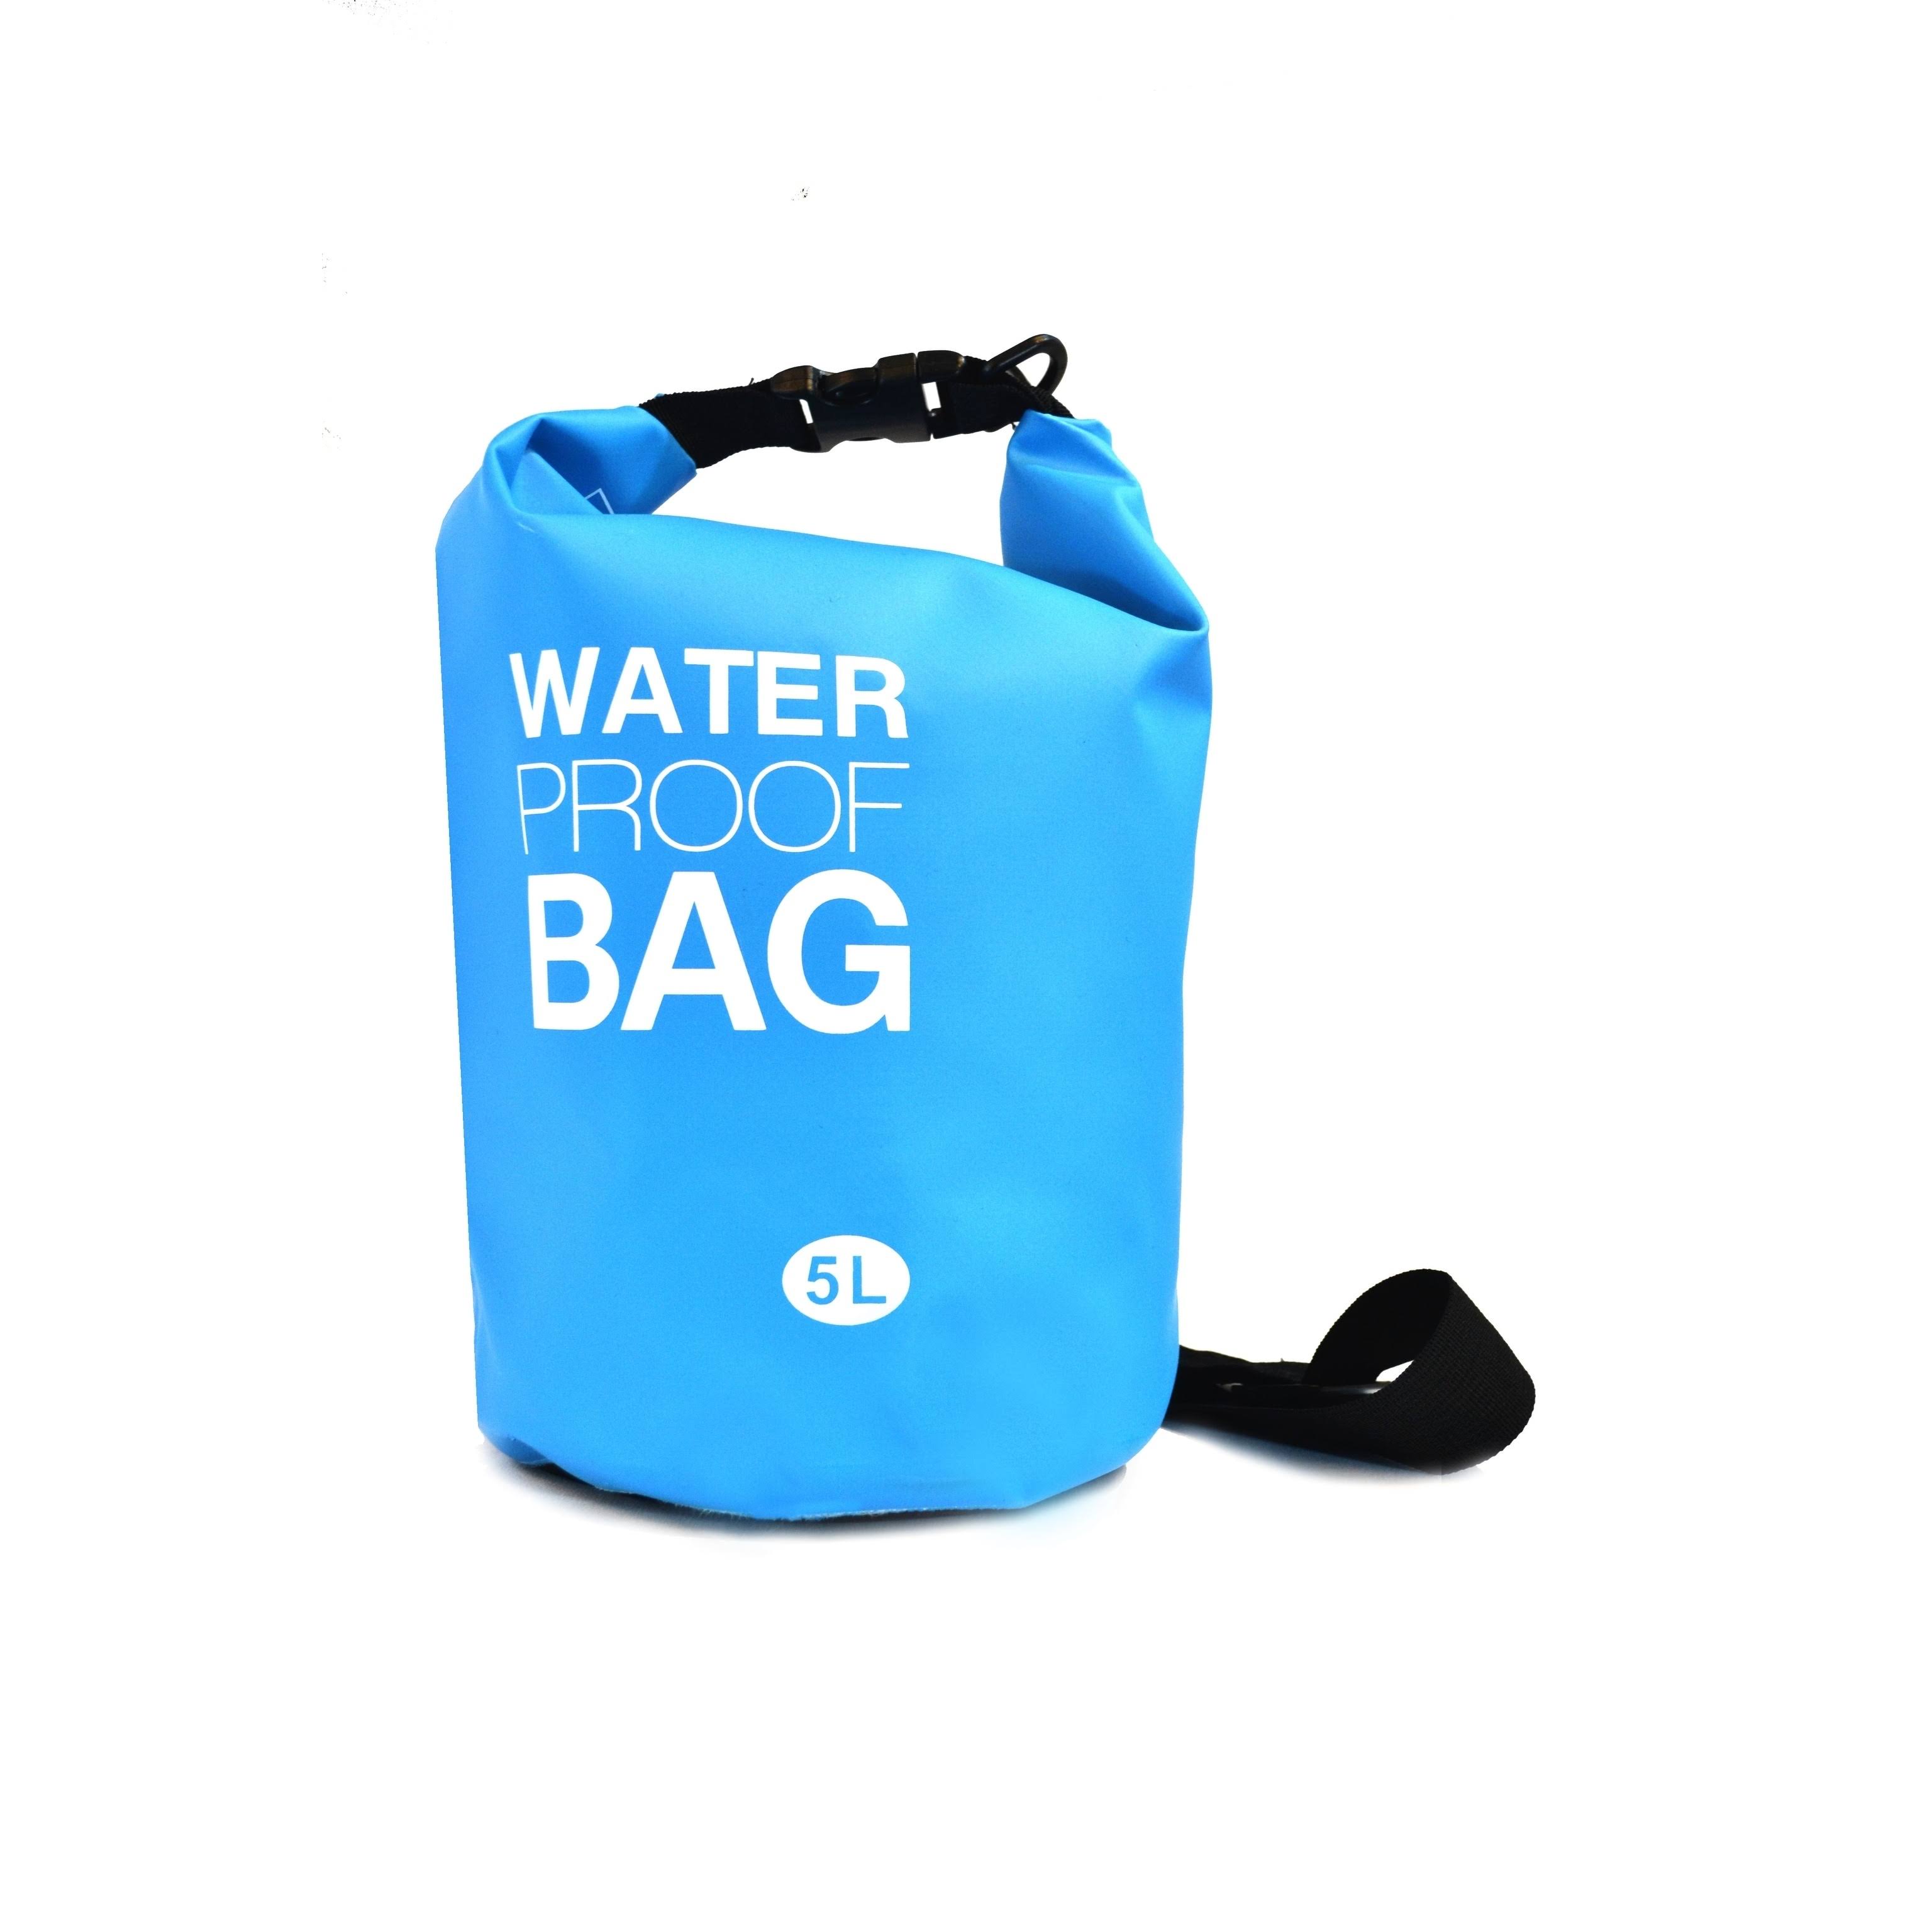 Nupouch Waterproof Dry Bag, Light Blue, 5 L